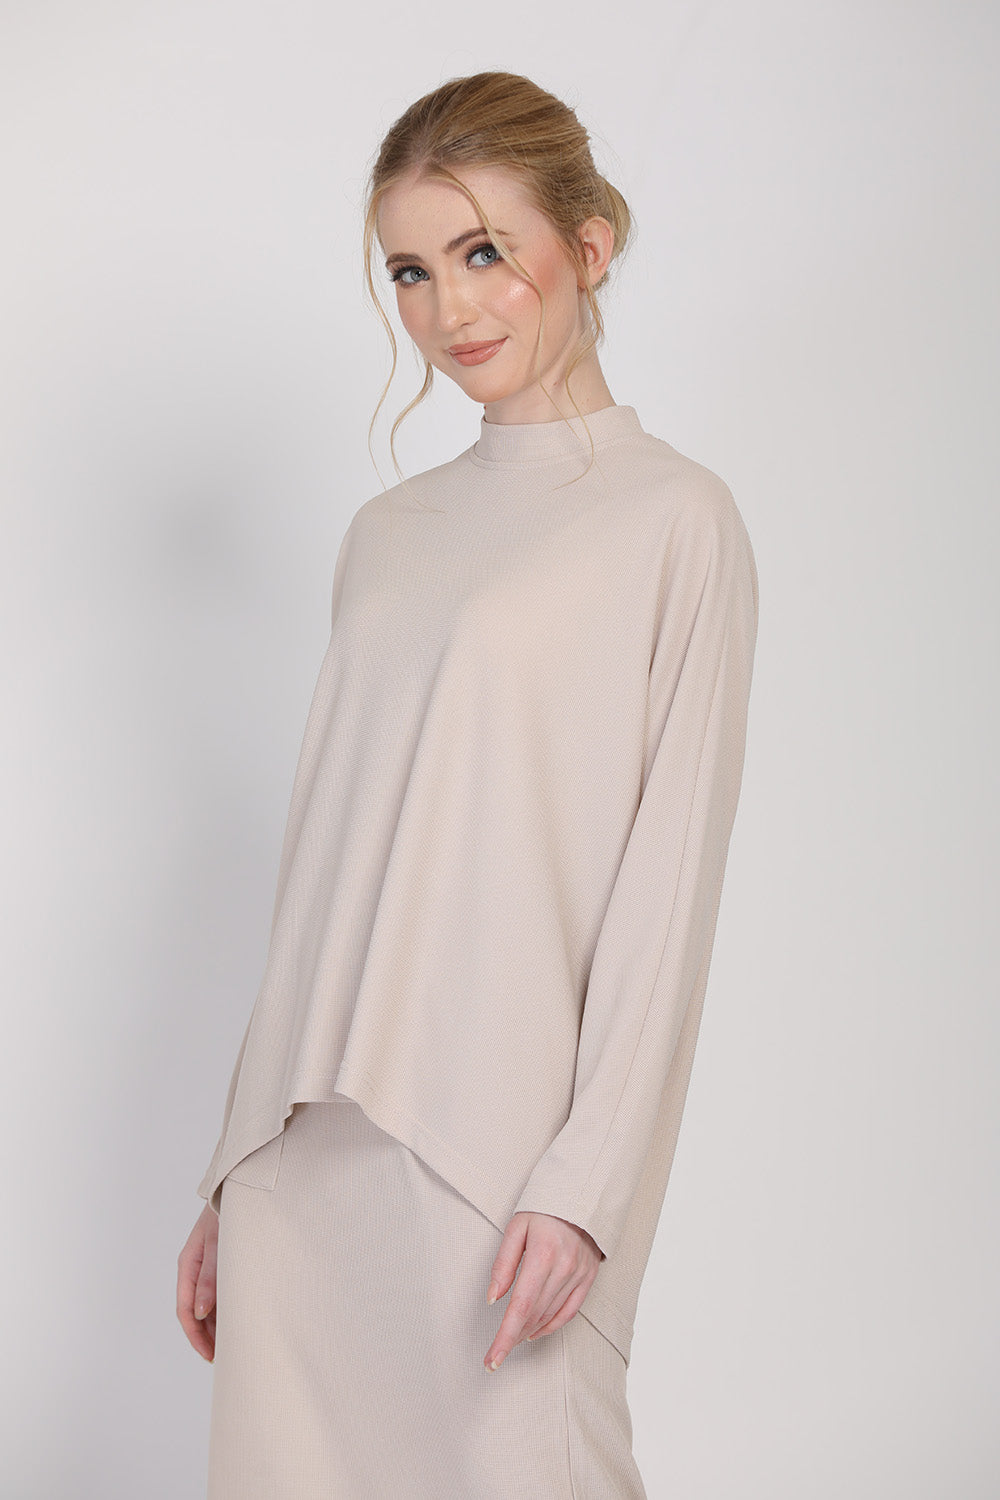 The Cahaya Knit Top in Apricot